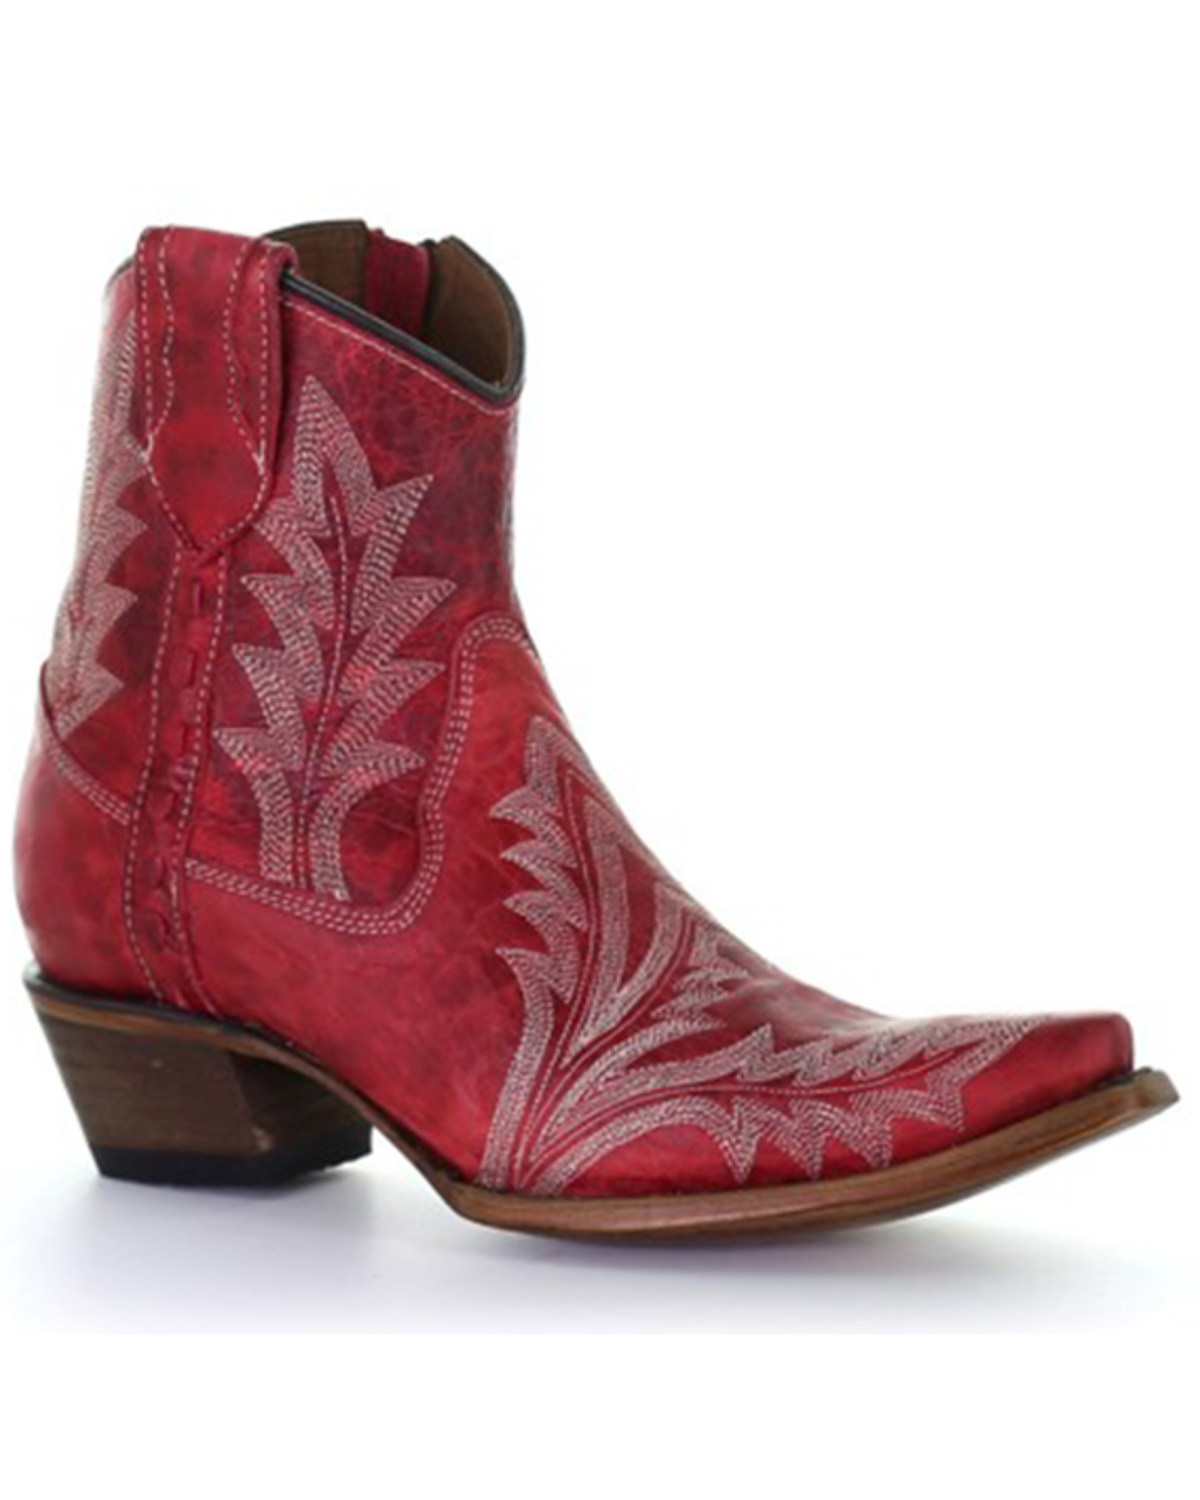 Corral Women's Embroidered Western Booties - Snip Toe